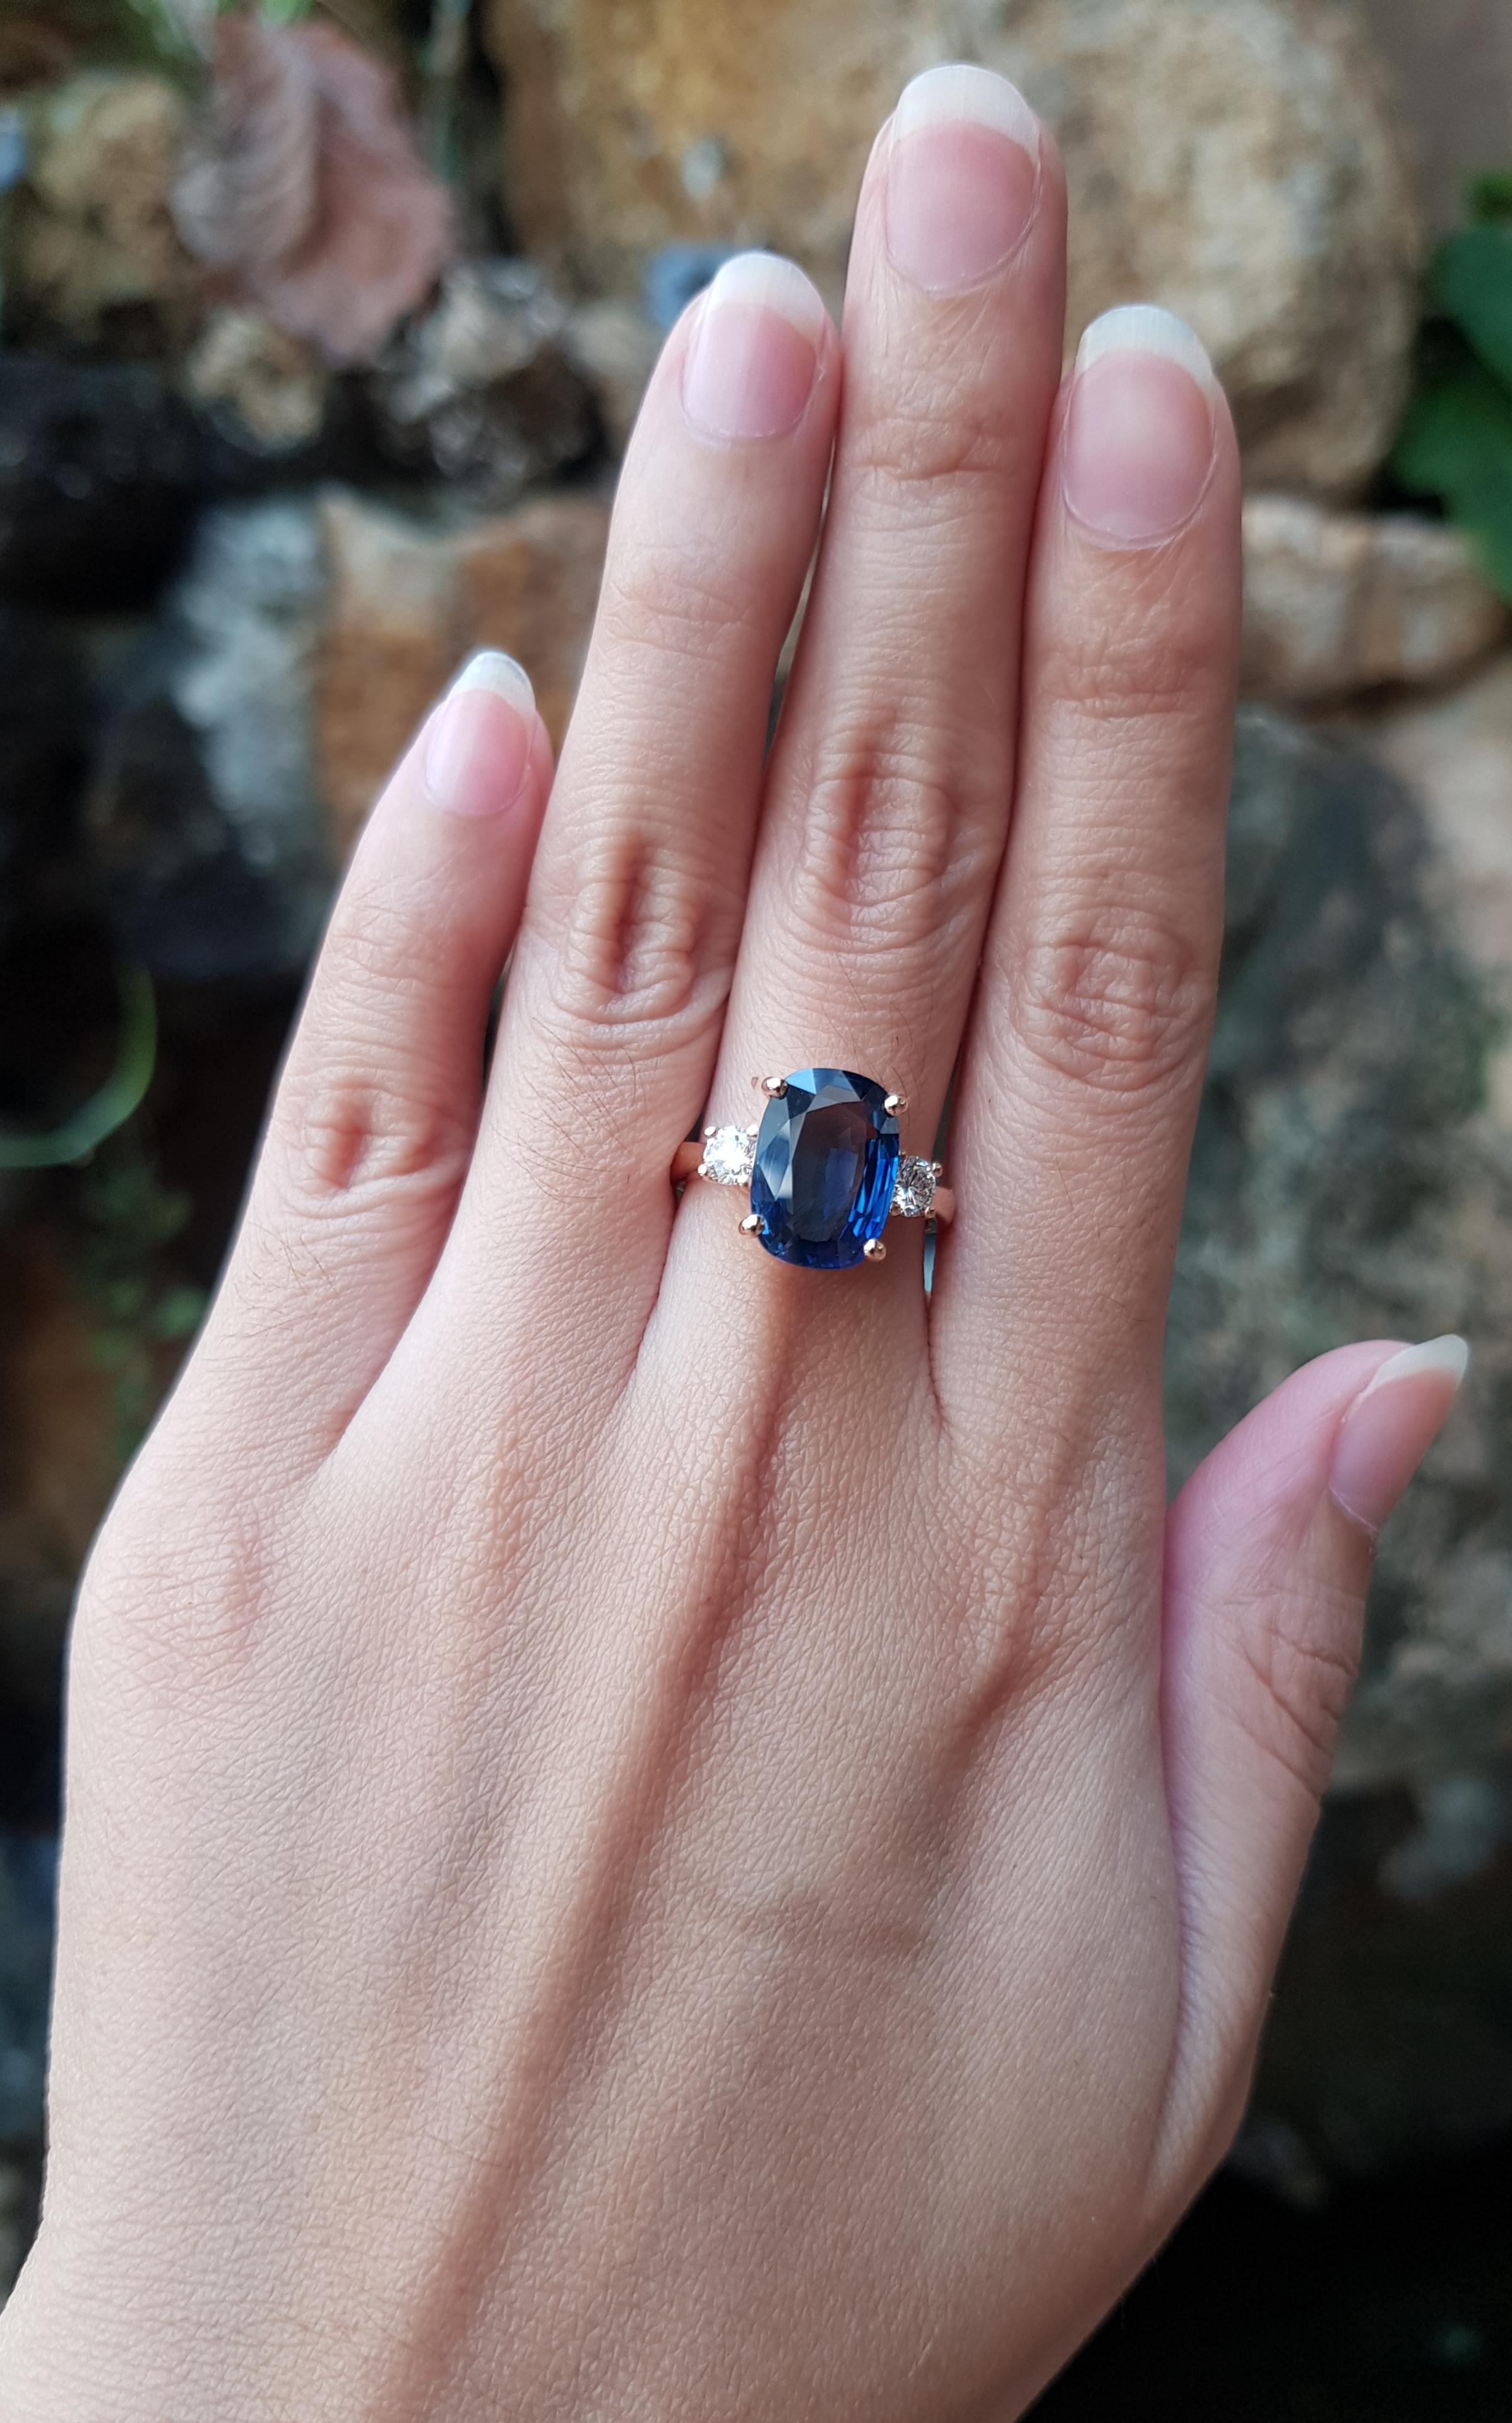 Blue Sapphire 6.30 carats with Diamond 0.46 carat Ring set in 18 Karat Rose Gold Settings
(GIA Certified)

Width:  1.5 cm 
Length: 1.1 cm
Ring Size: 53
Total Weight: 6.94 grams

Blue Sapphire 
Width:  0.9 cm 
Length: 1.1 cm

